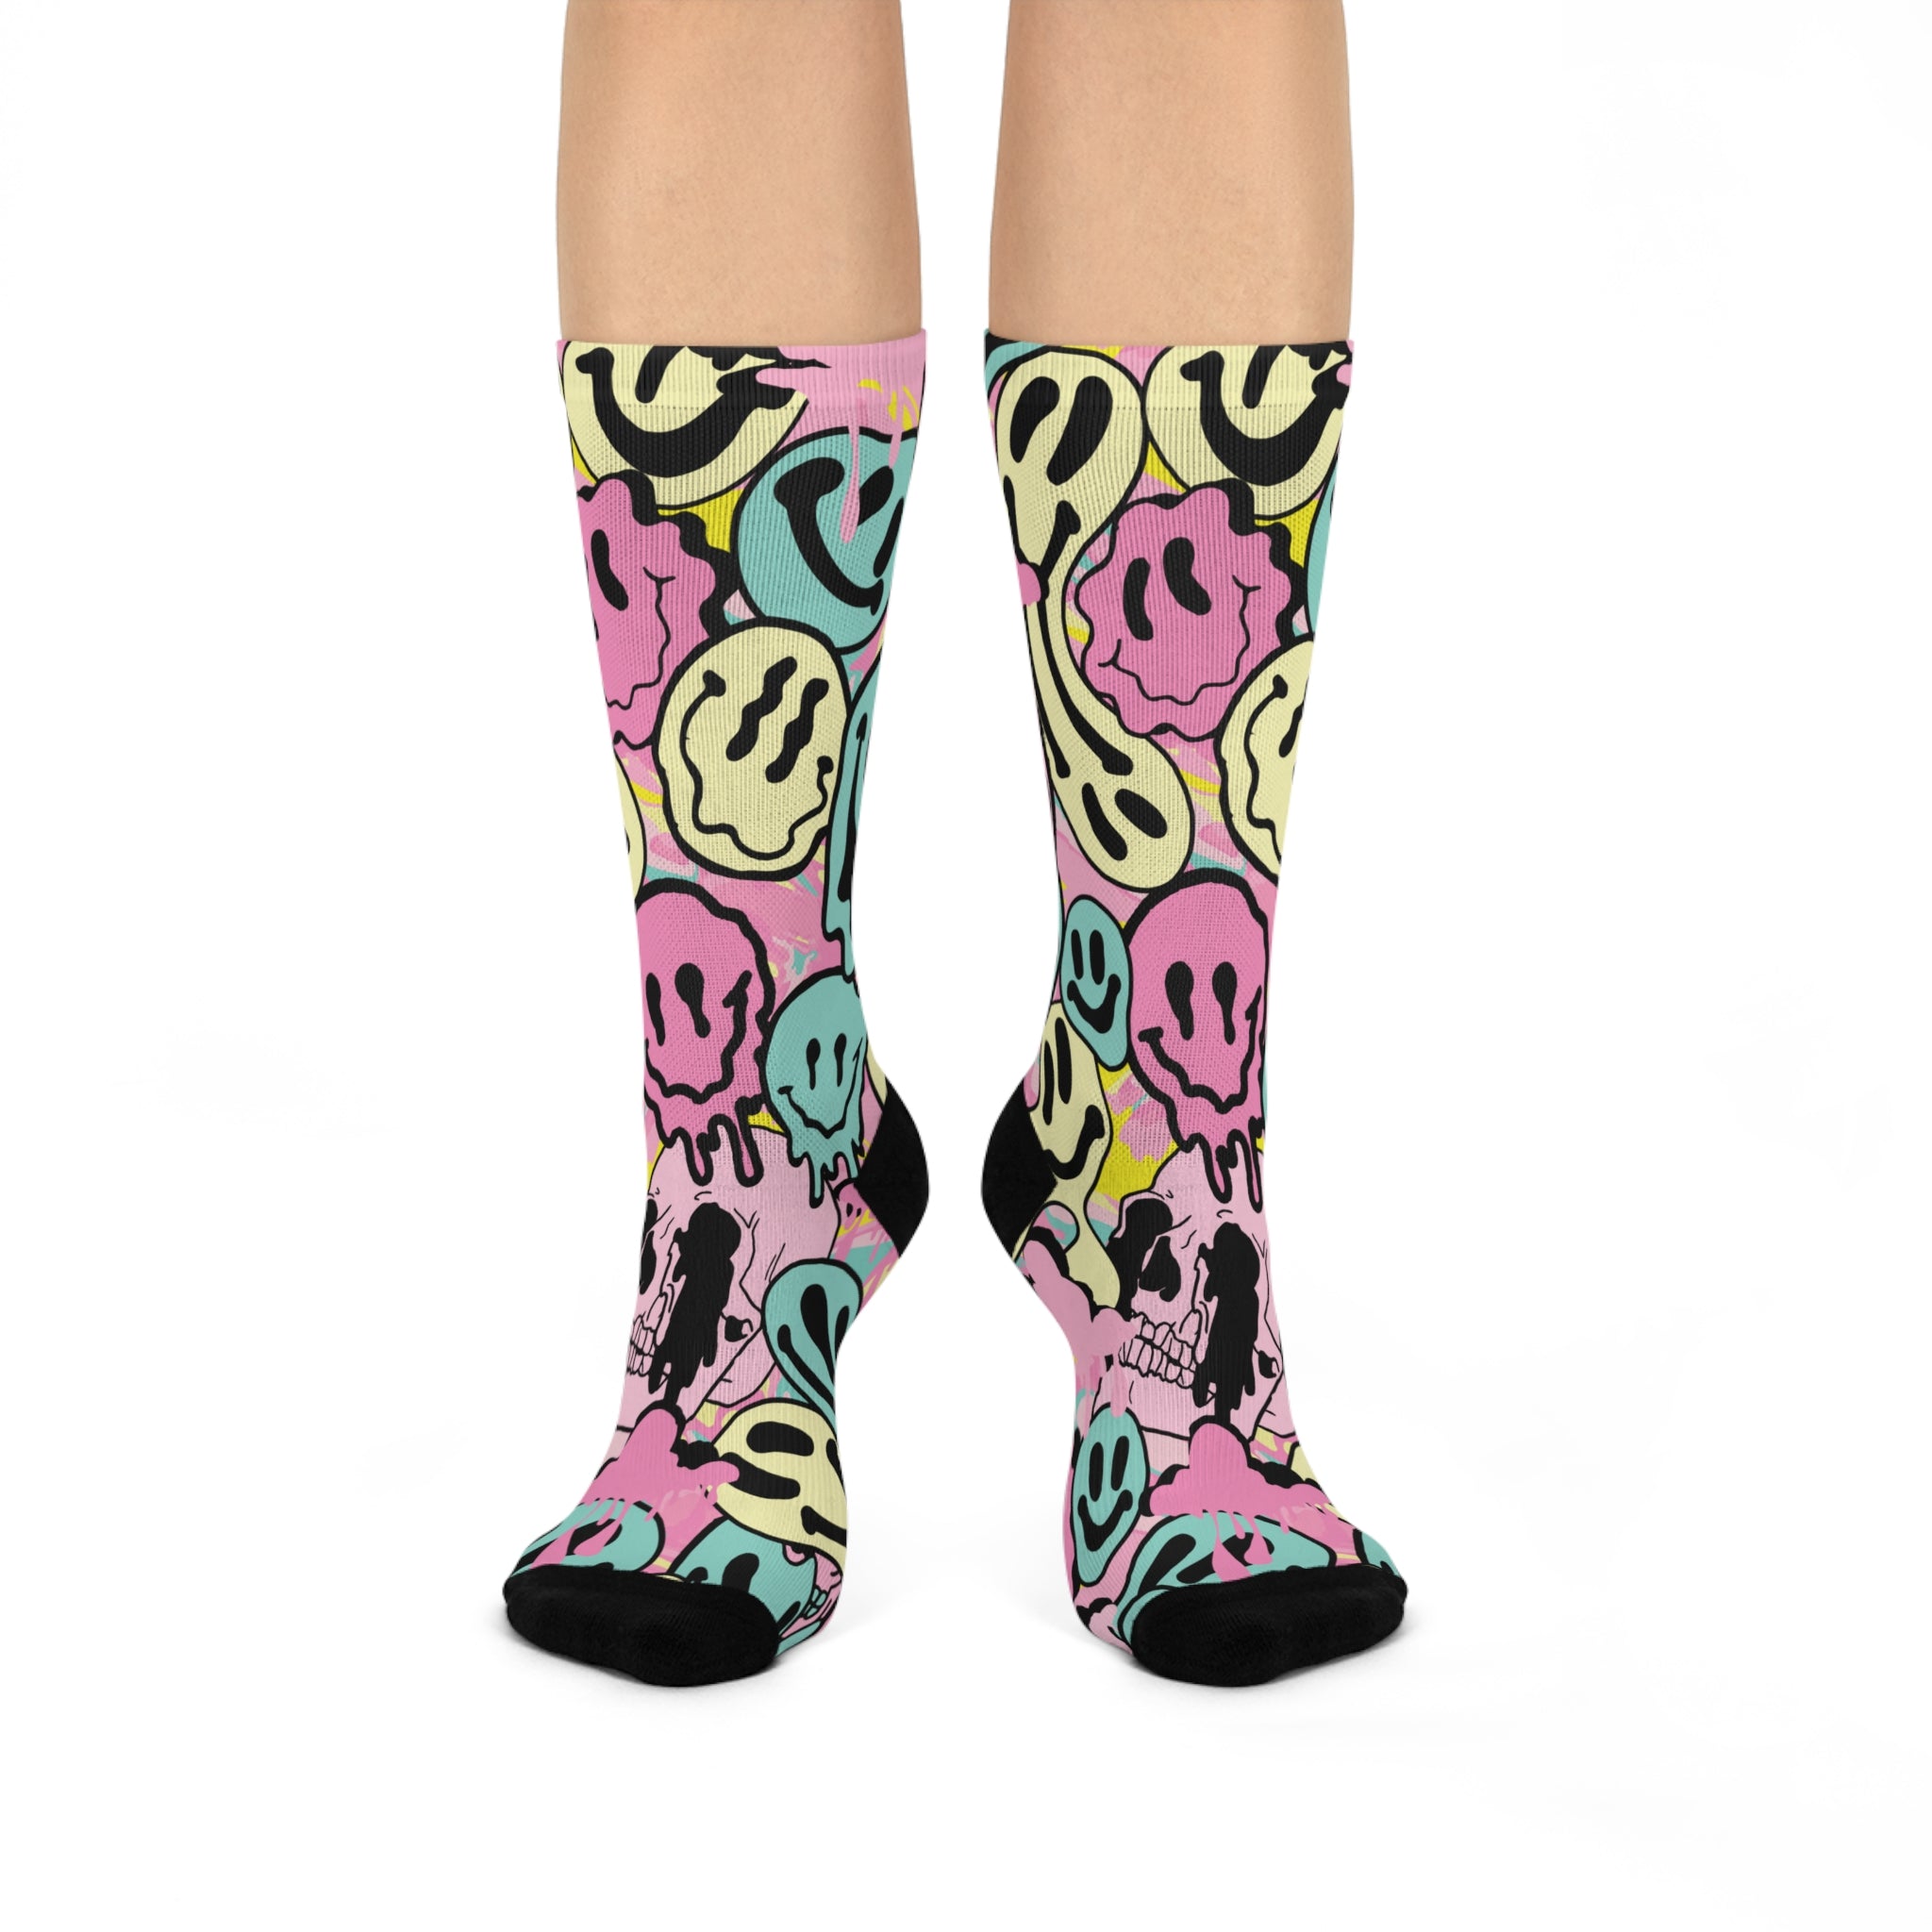 Fun and vibrant socks adorned with a 90s-inspired design of melting smiley faces in various colors, with black heels and toes, perfect for those who love retro and unique styles.